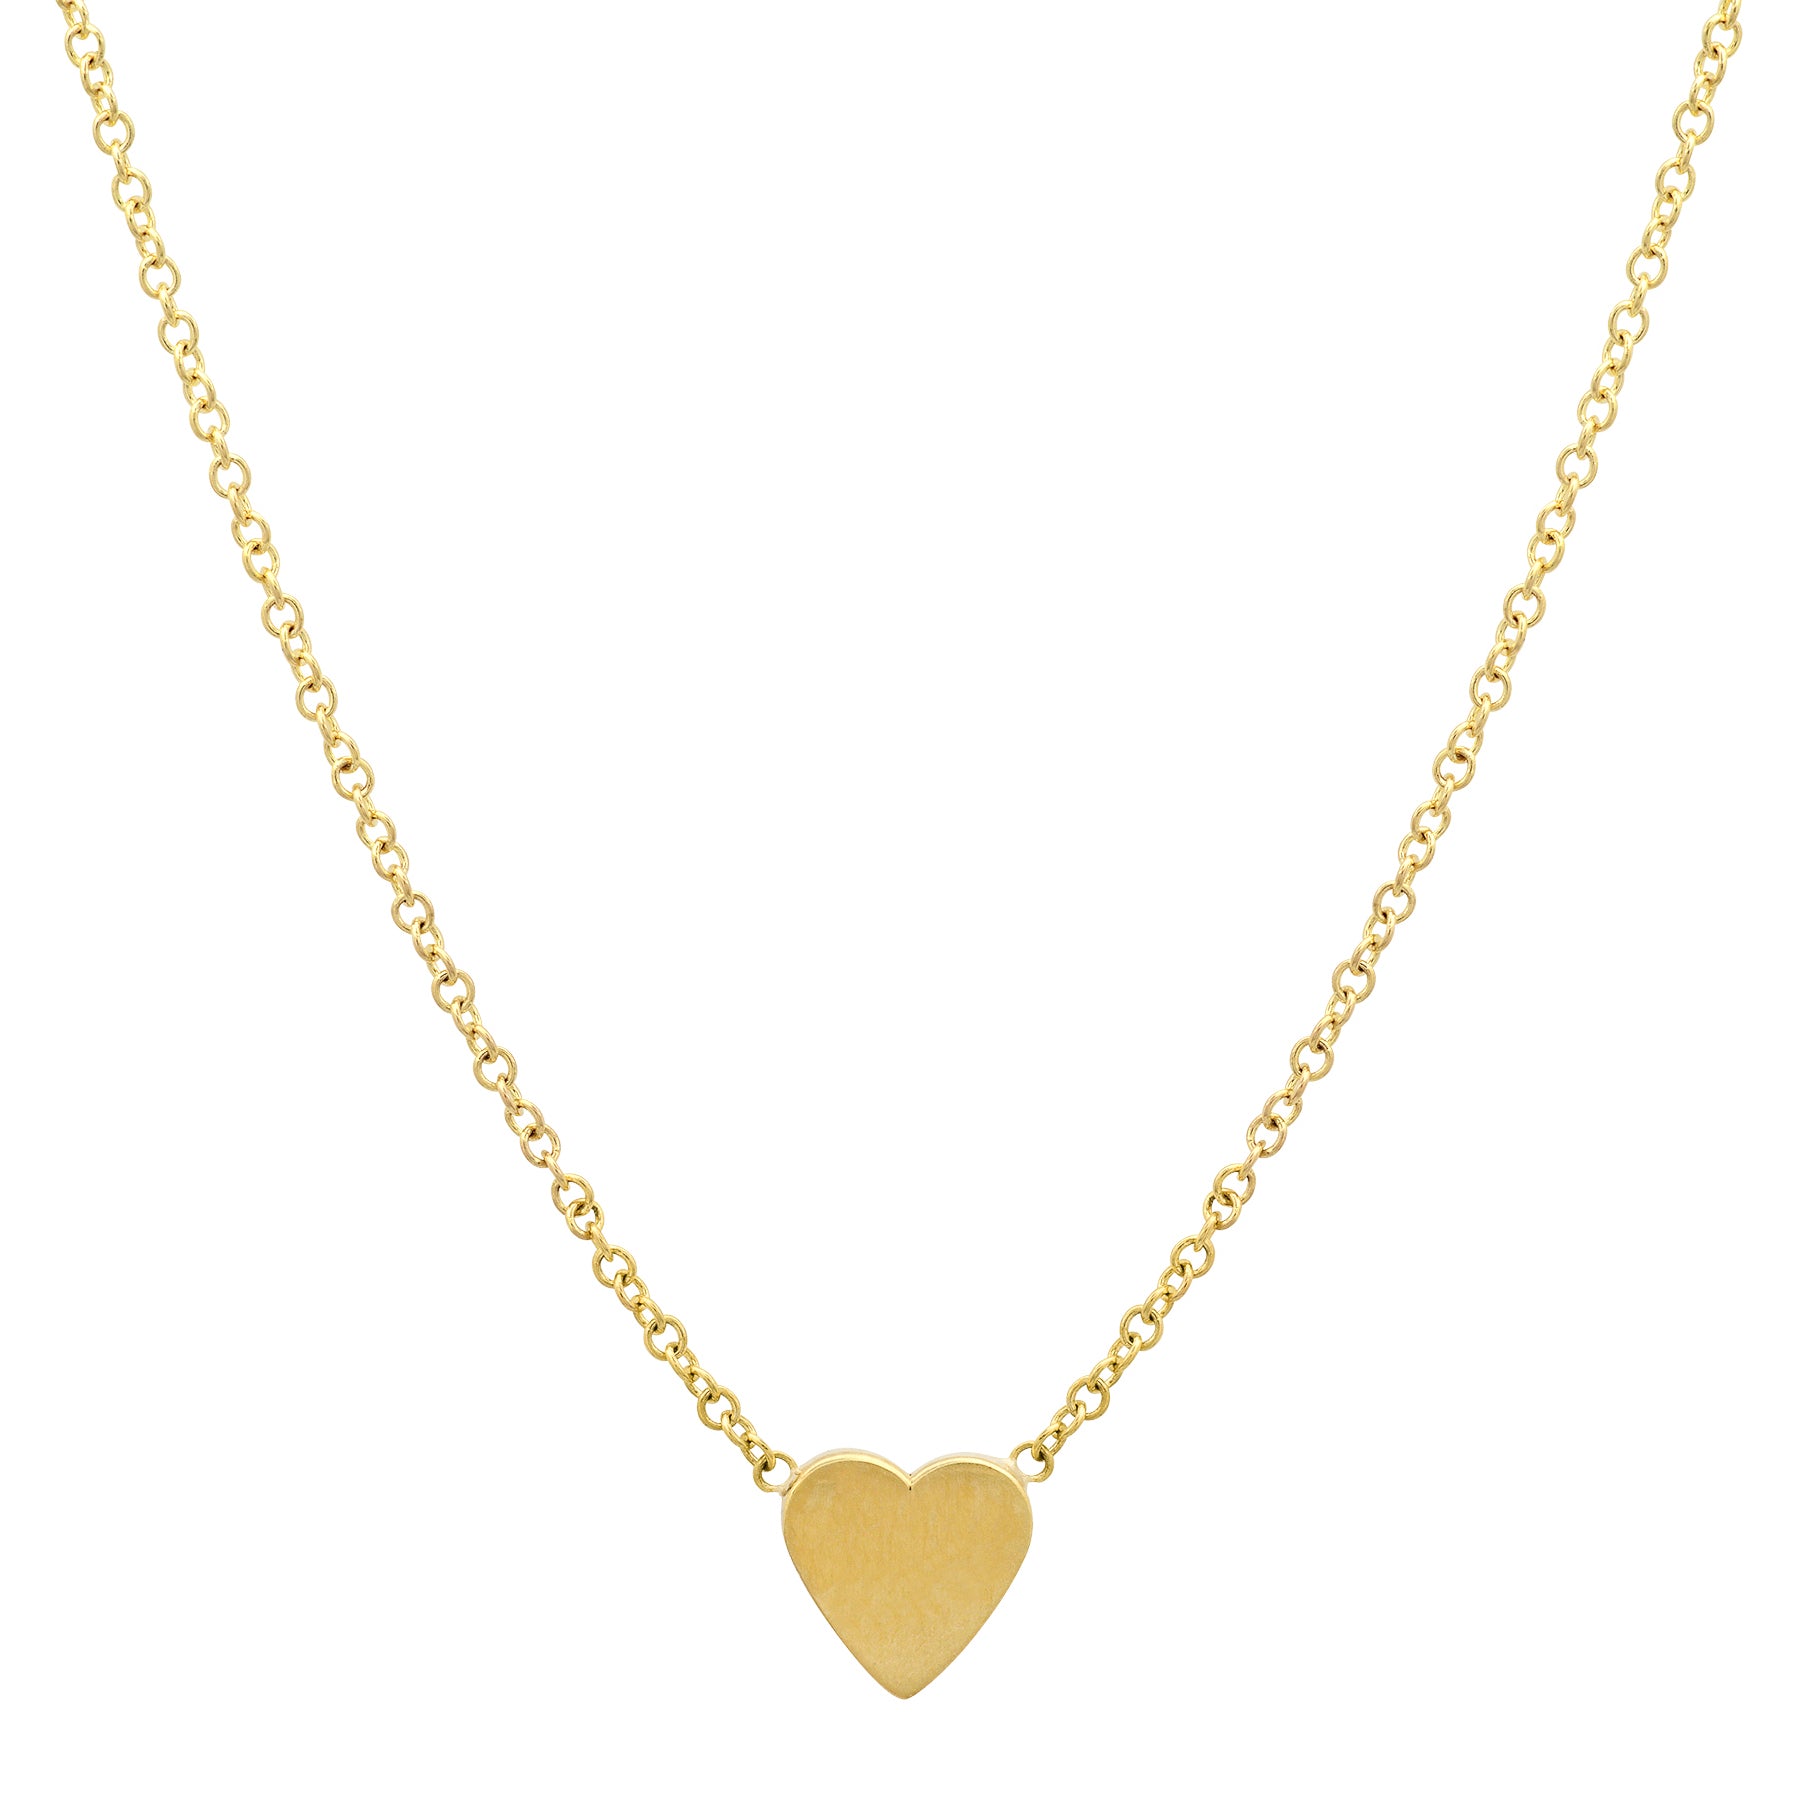 Triple Heart Charm Necklace in Solid Gold - Tales In Gold